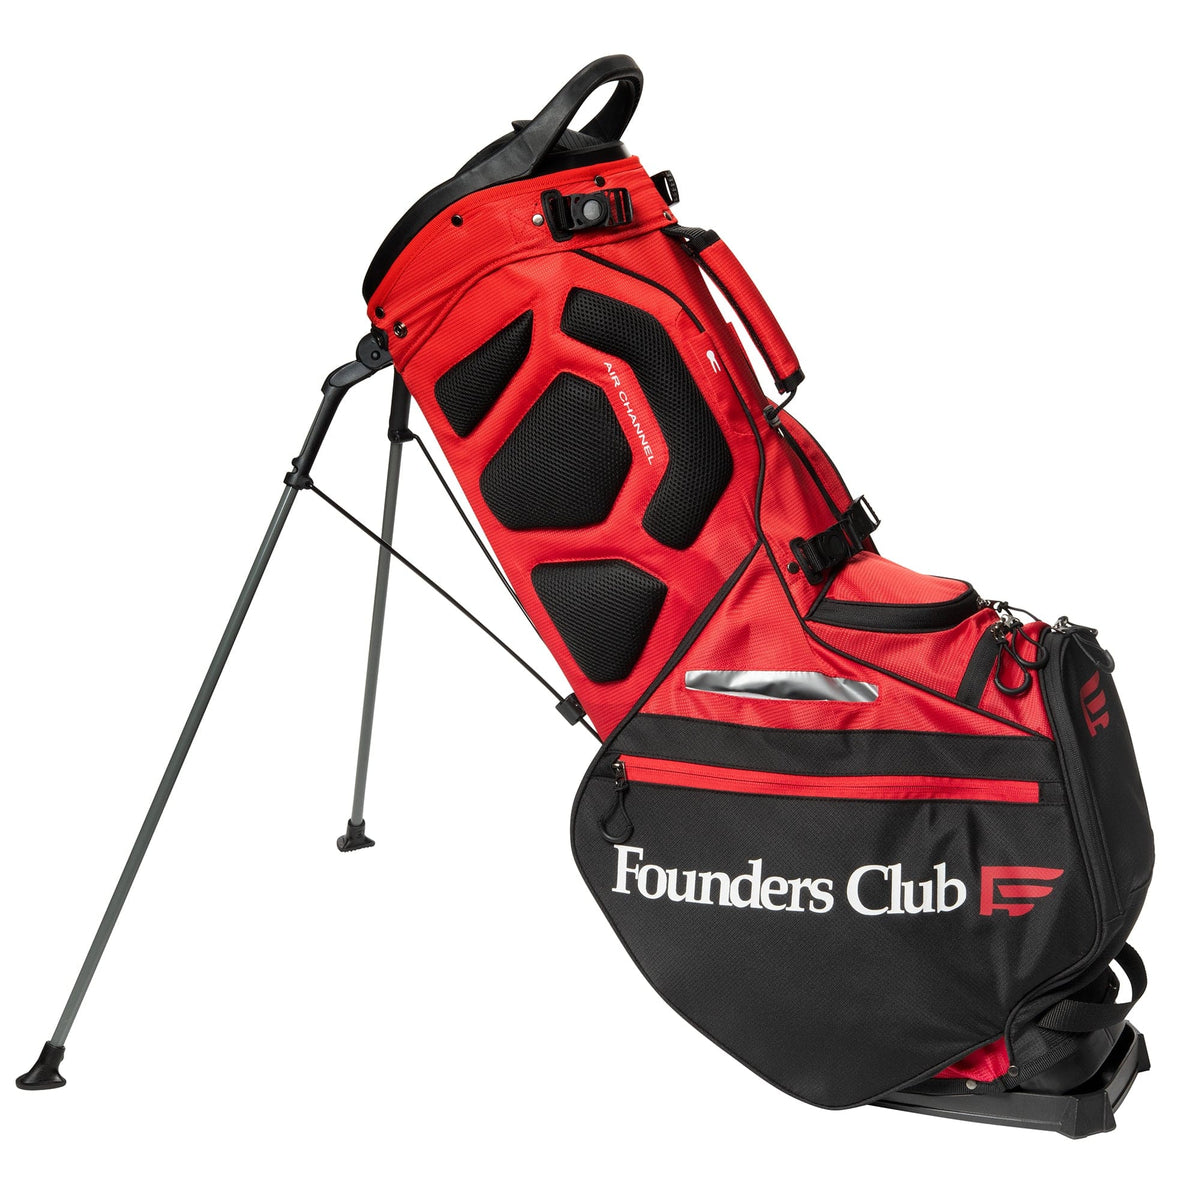 Founders Club Golf Lock 14 Stand Bag with Shaft Lock Top